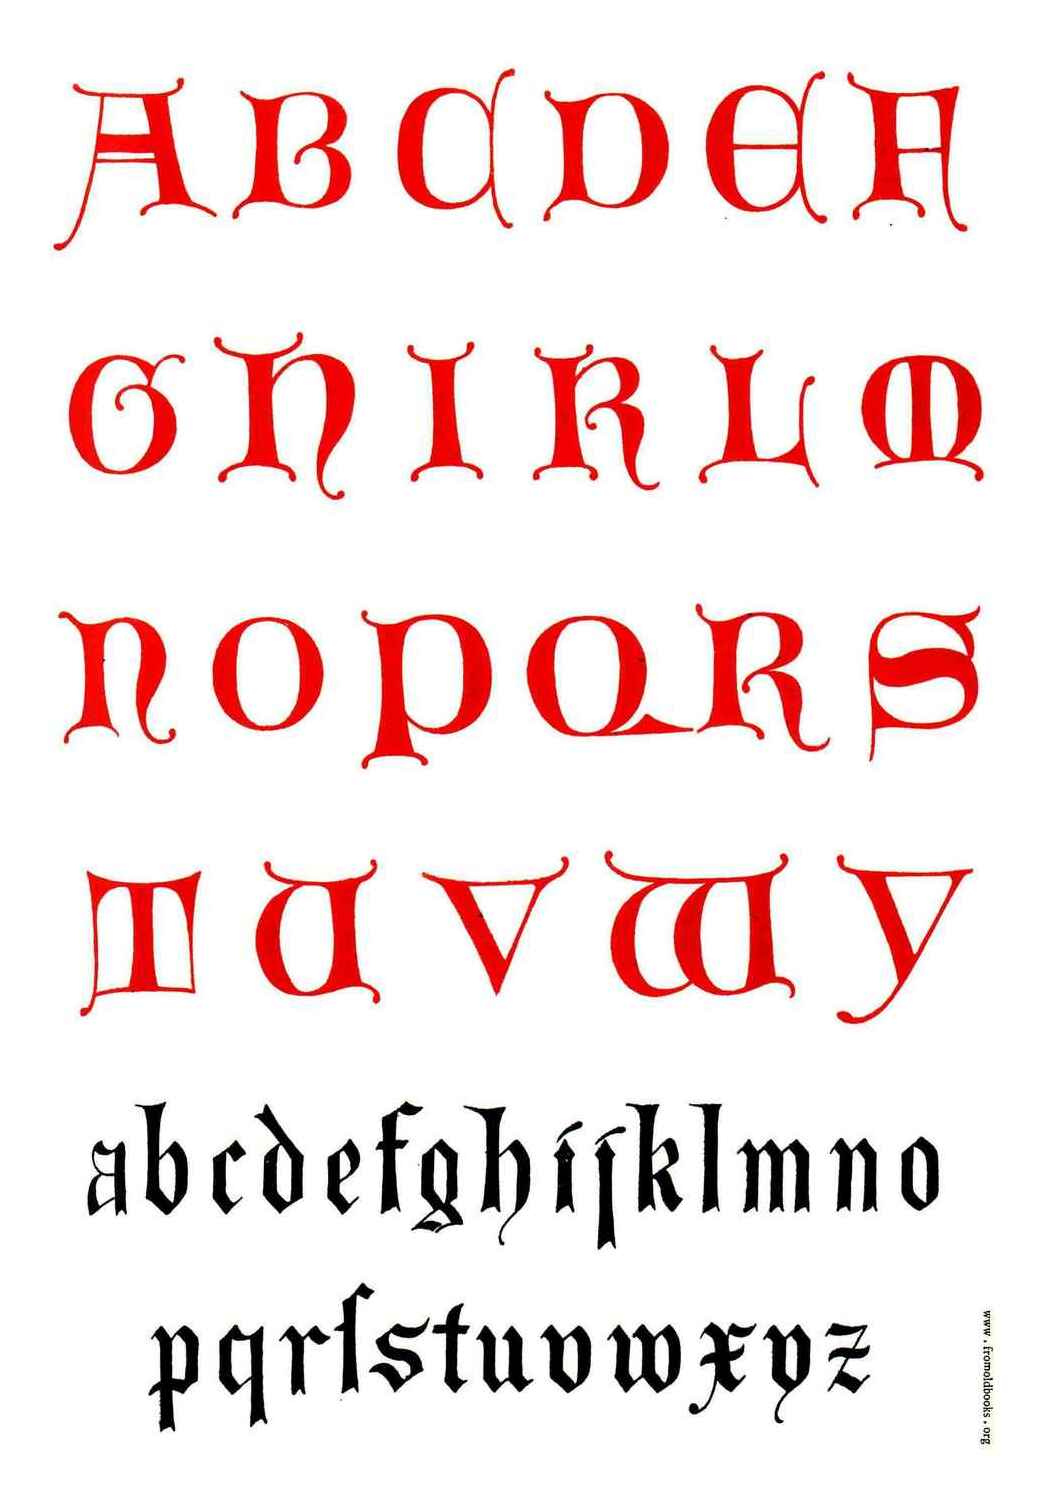 Plate 43, 14th century Lombardic alphabet, The Art of Illuminating As Practised in Europe from the Earliest Times, Tymms 1860, modeled after earlier Lombardic capitals